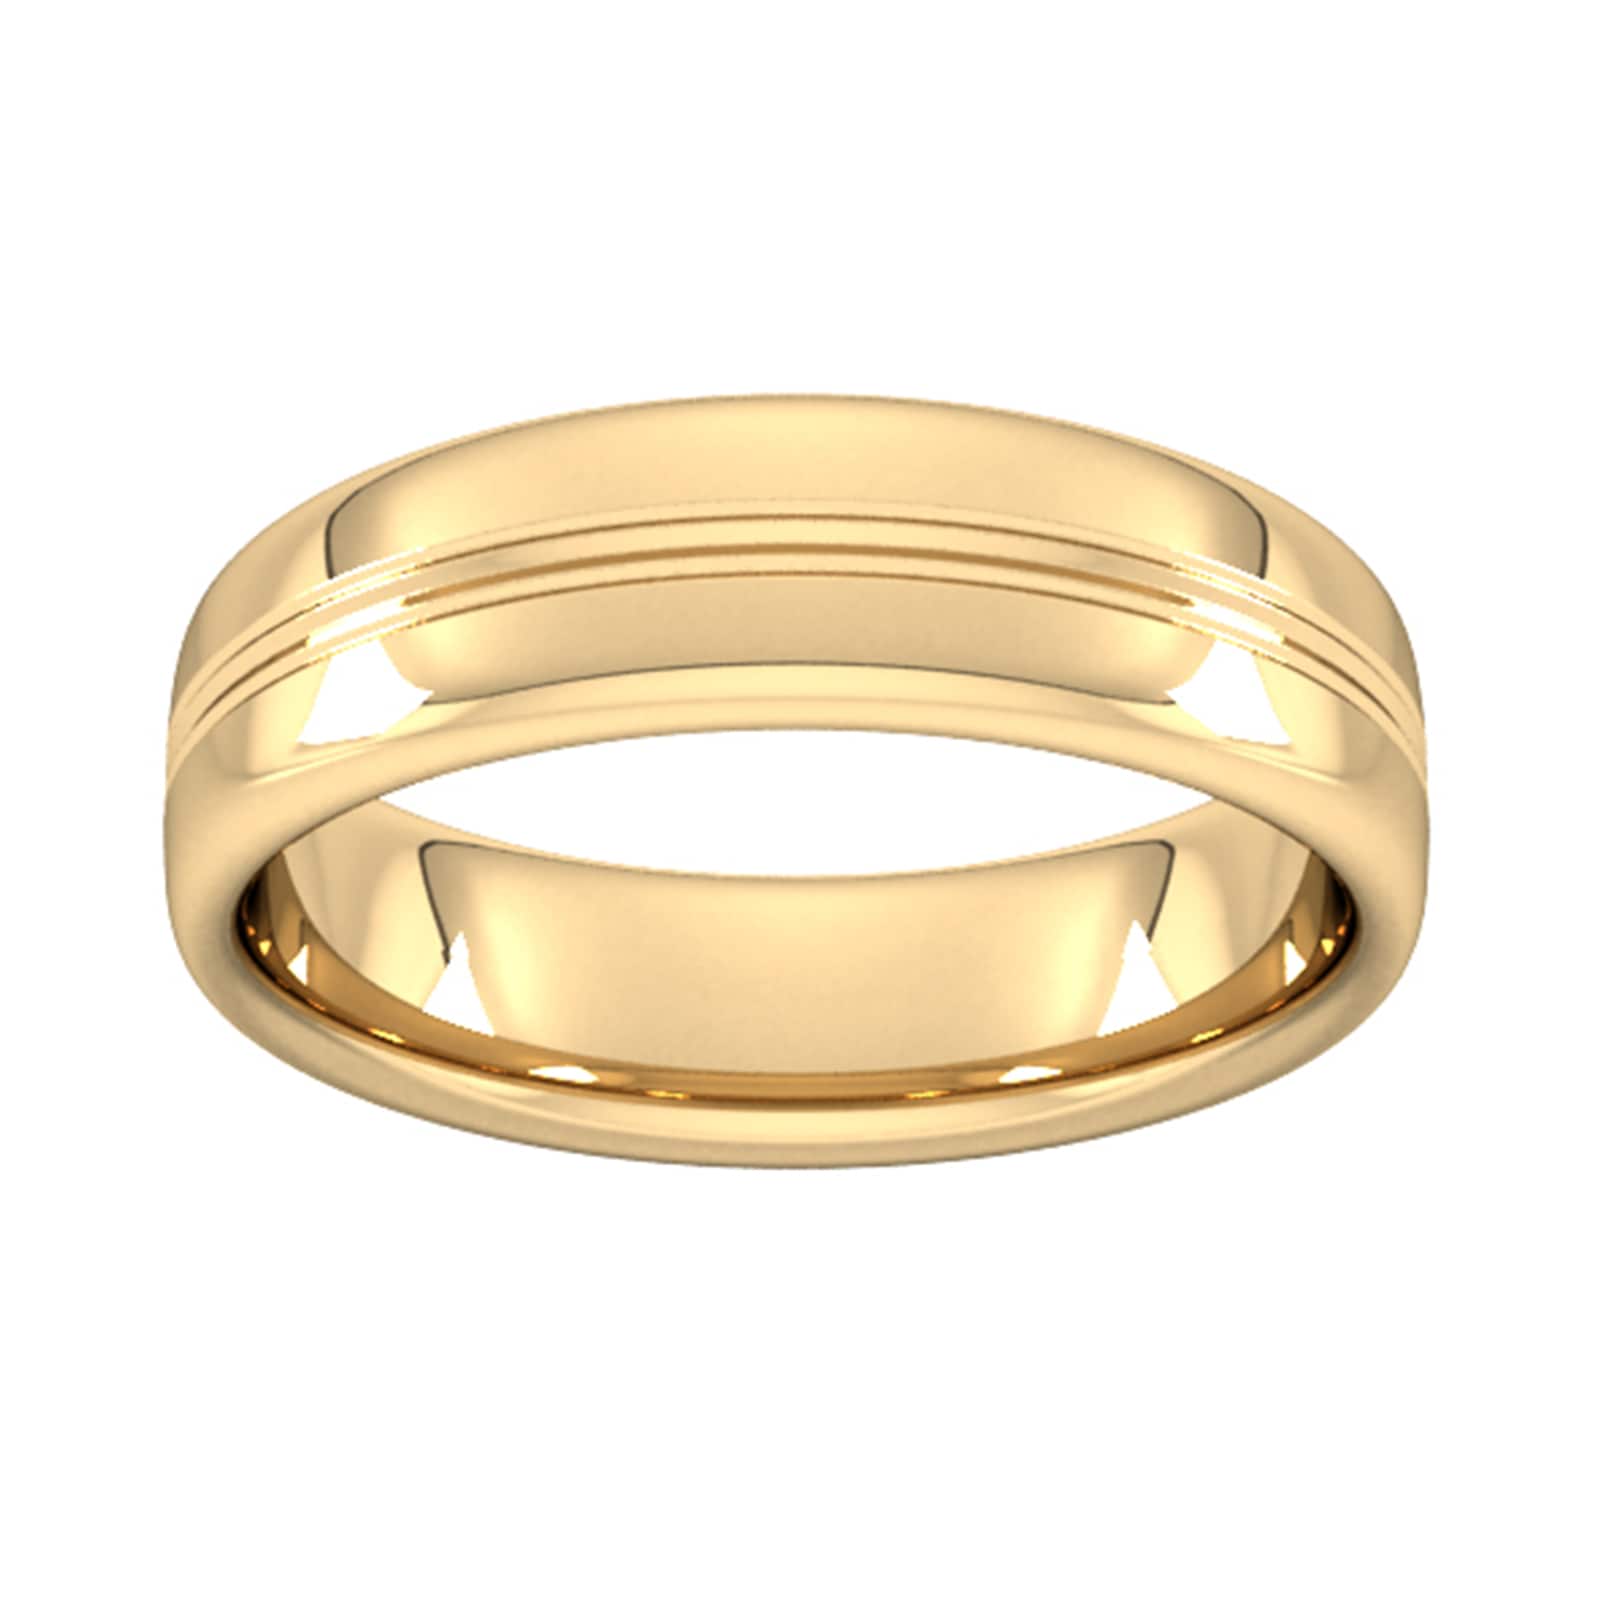 6mm Slight Court Heavy Grooved Polished Finish Wedding Ring In 18 Carat Yellow Gold - Ring Size H